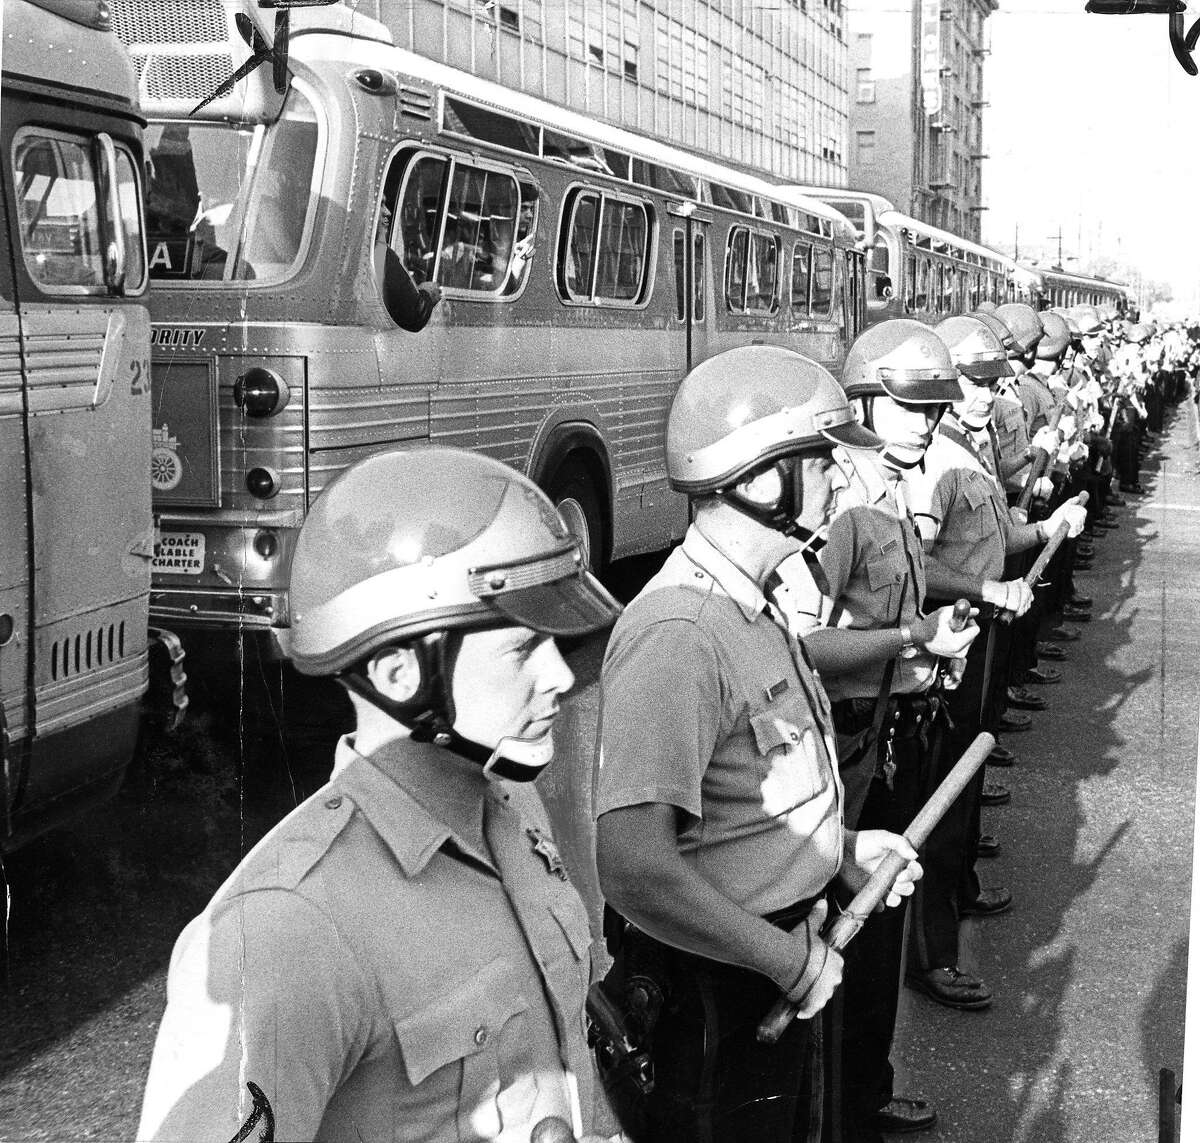 Police are escorting buses of inductees through anti-war demonstrators who are blocking access to the Oakland Induction Center, October 16, 1967 Draft and Vietnam War protesters Phot ran 10/17/1967, p. 1